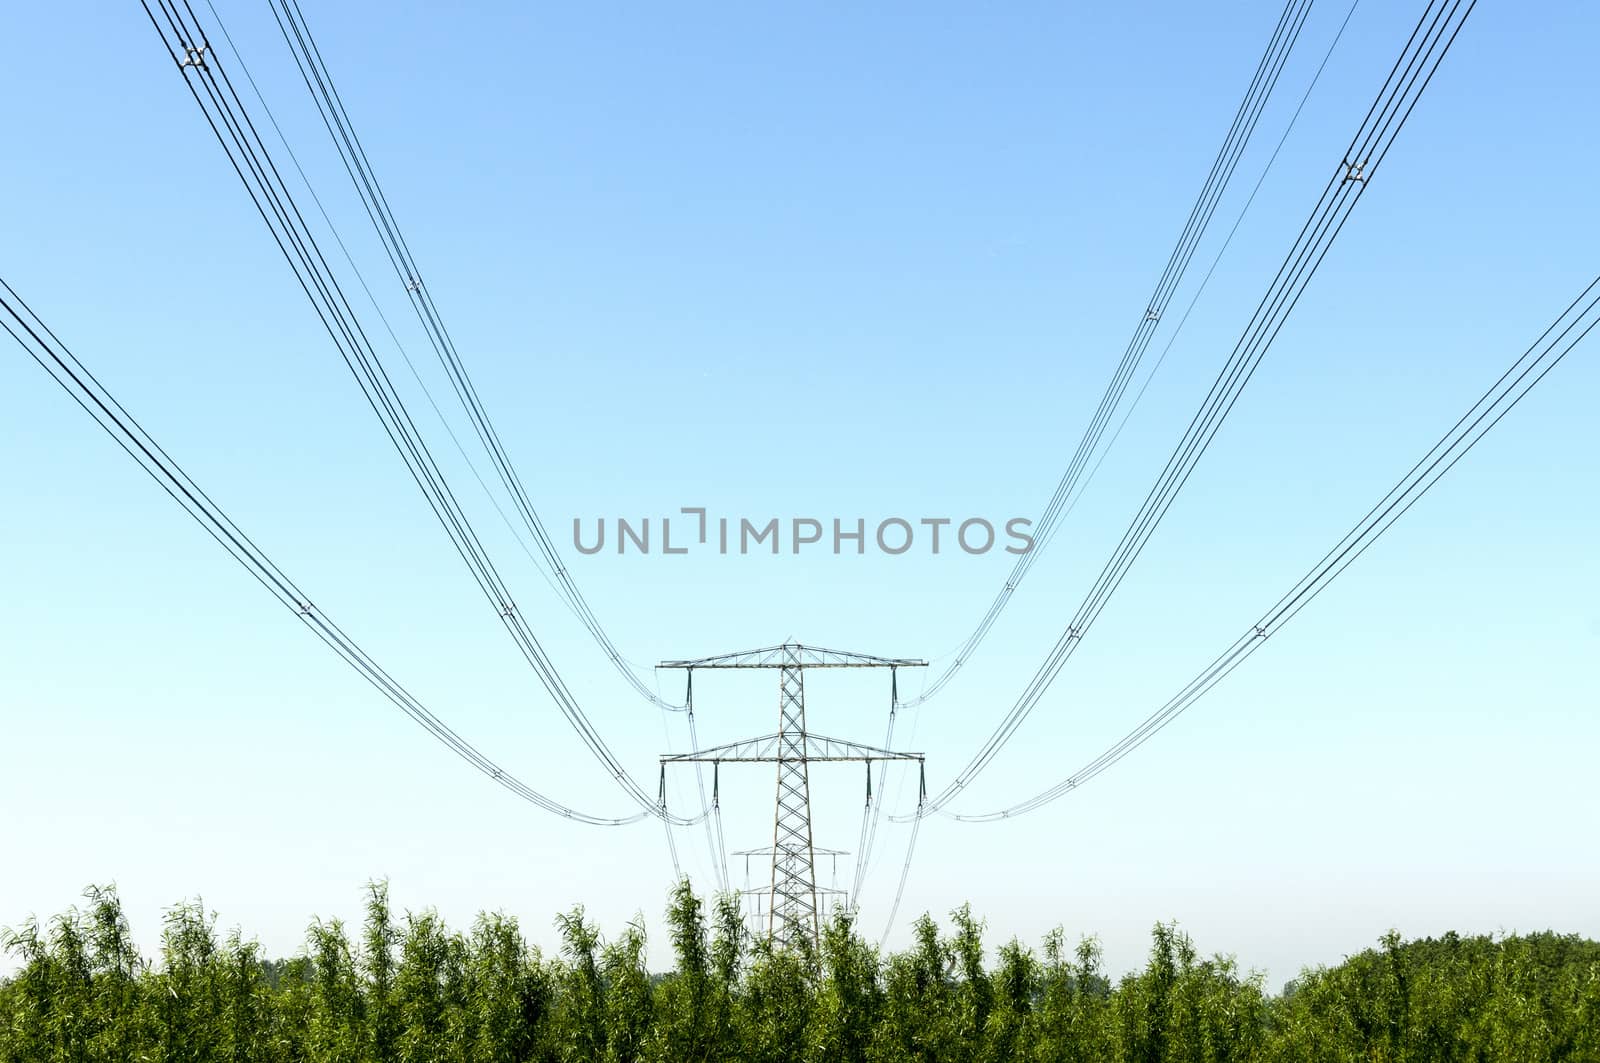 Electricity pylon with pwer lines and blue sky